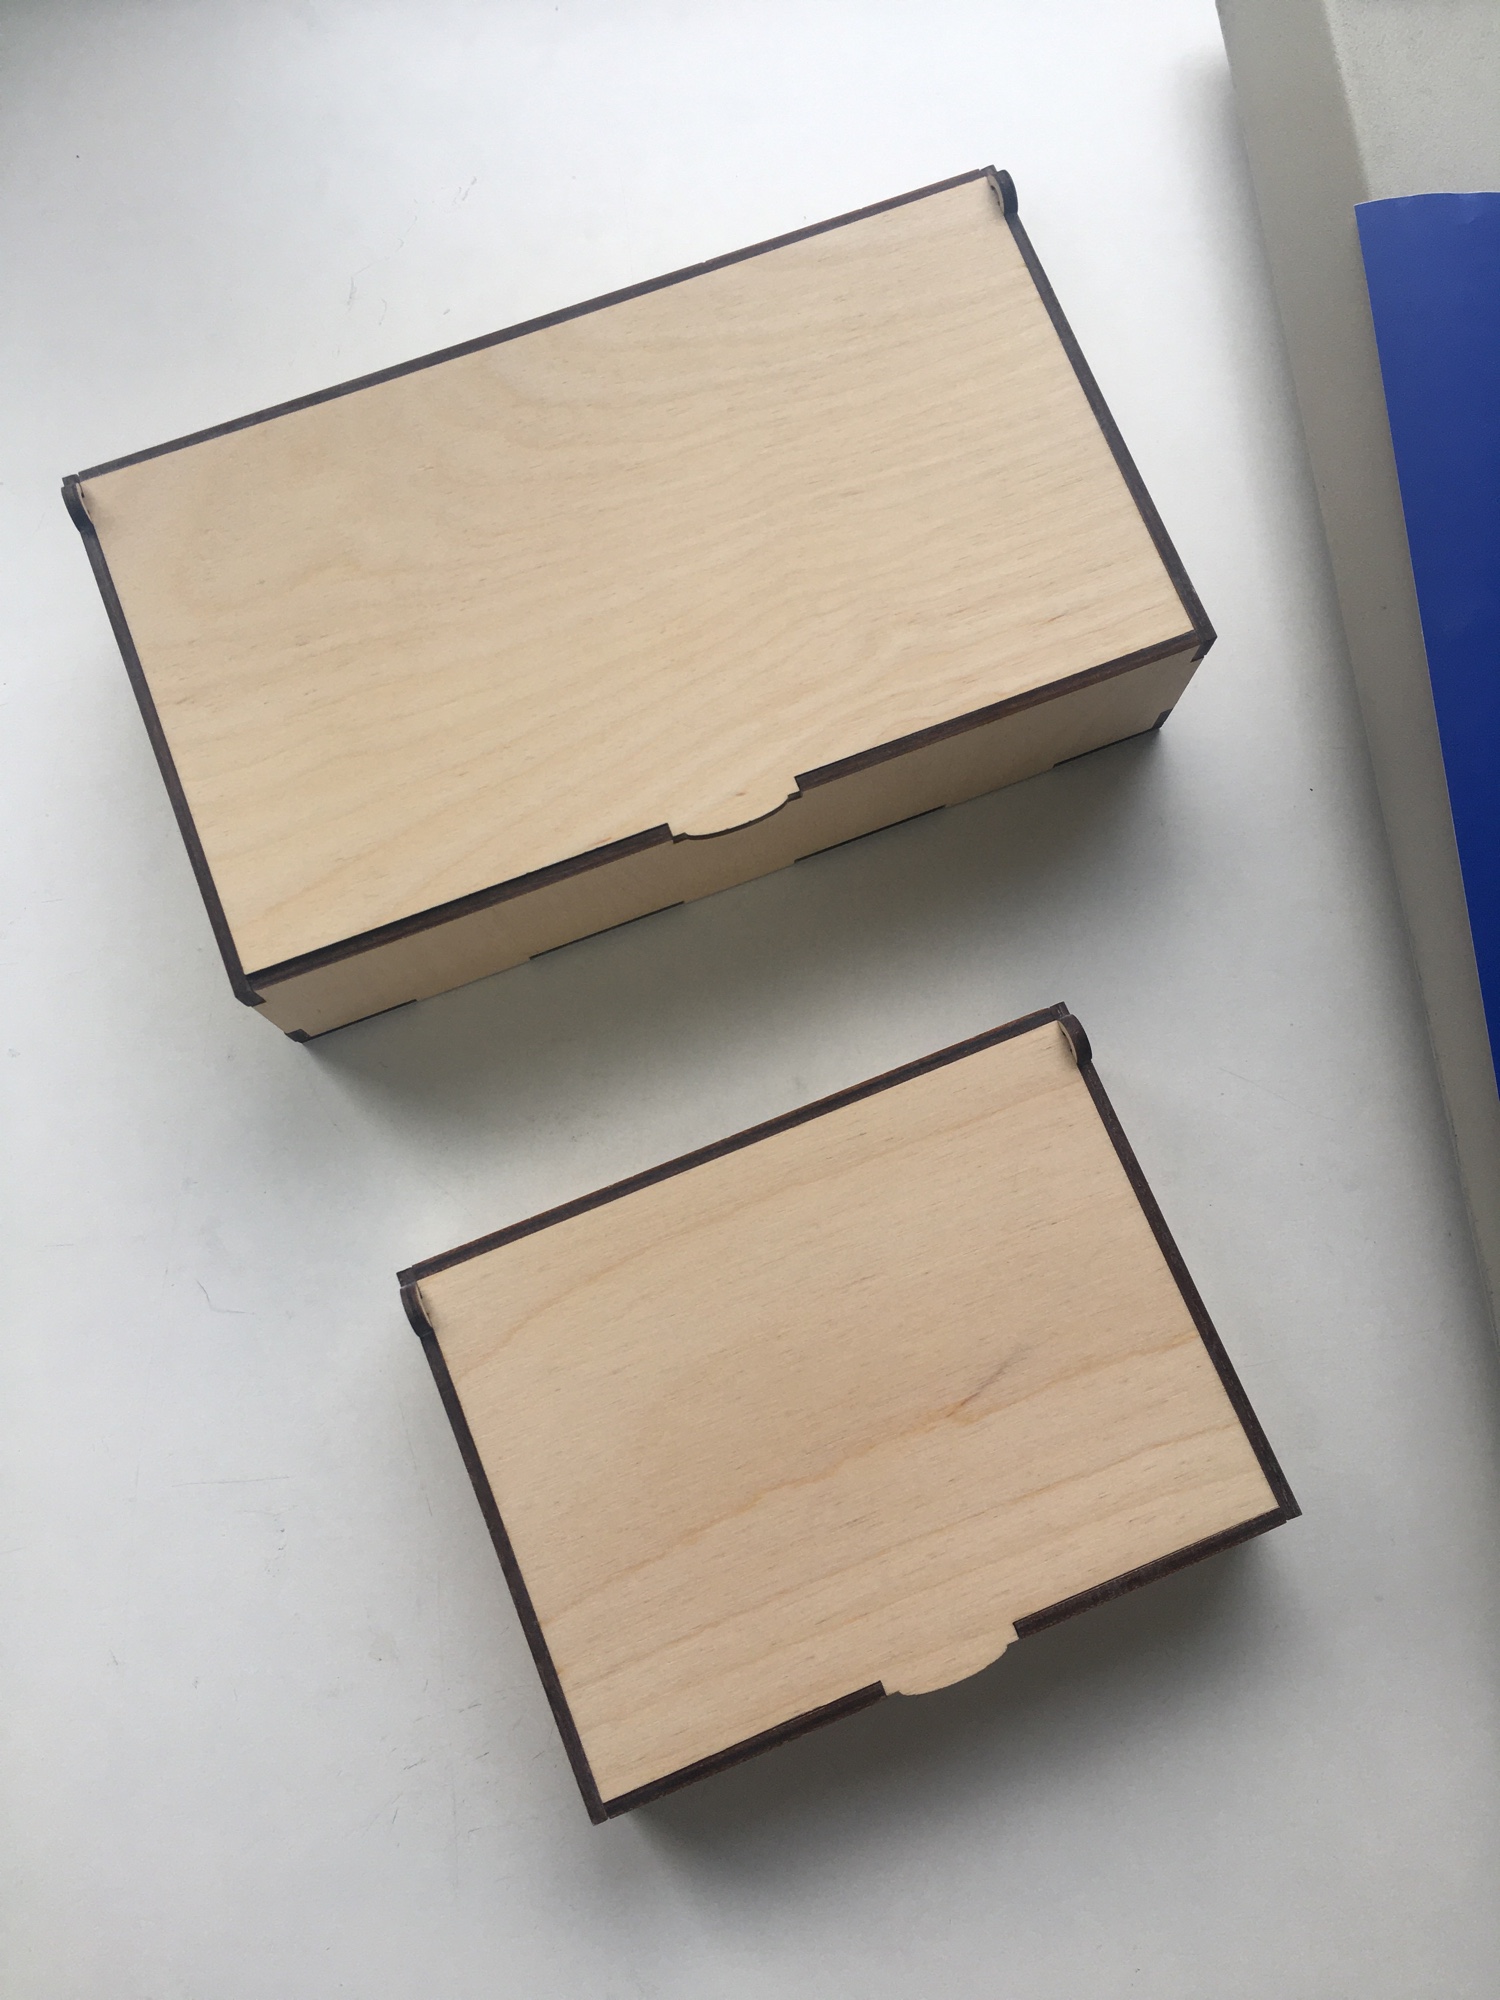 Laser Cut Wooden Boxes With Lids Free Vector cdr Download 3axis co